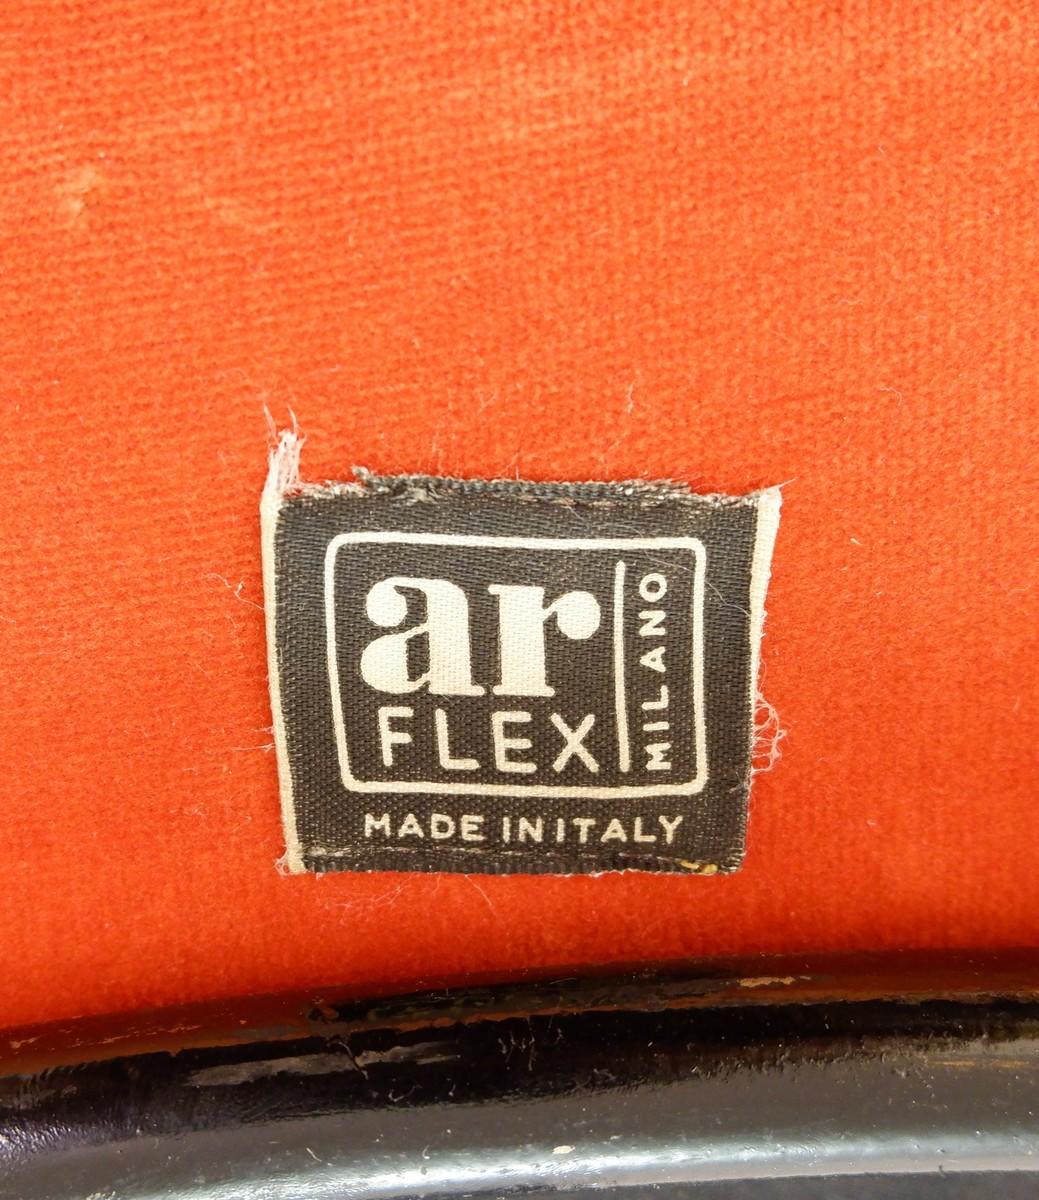 Pair of 'lady' armchairs by Marco Zanuso for Arflex - new orange velvet upholstery - Italy 1951.